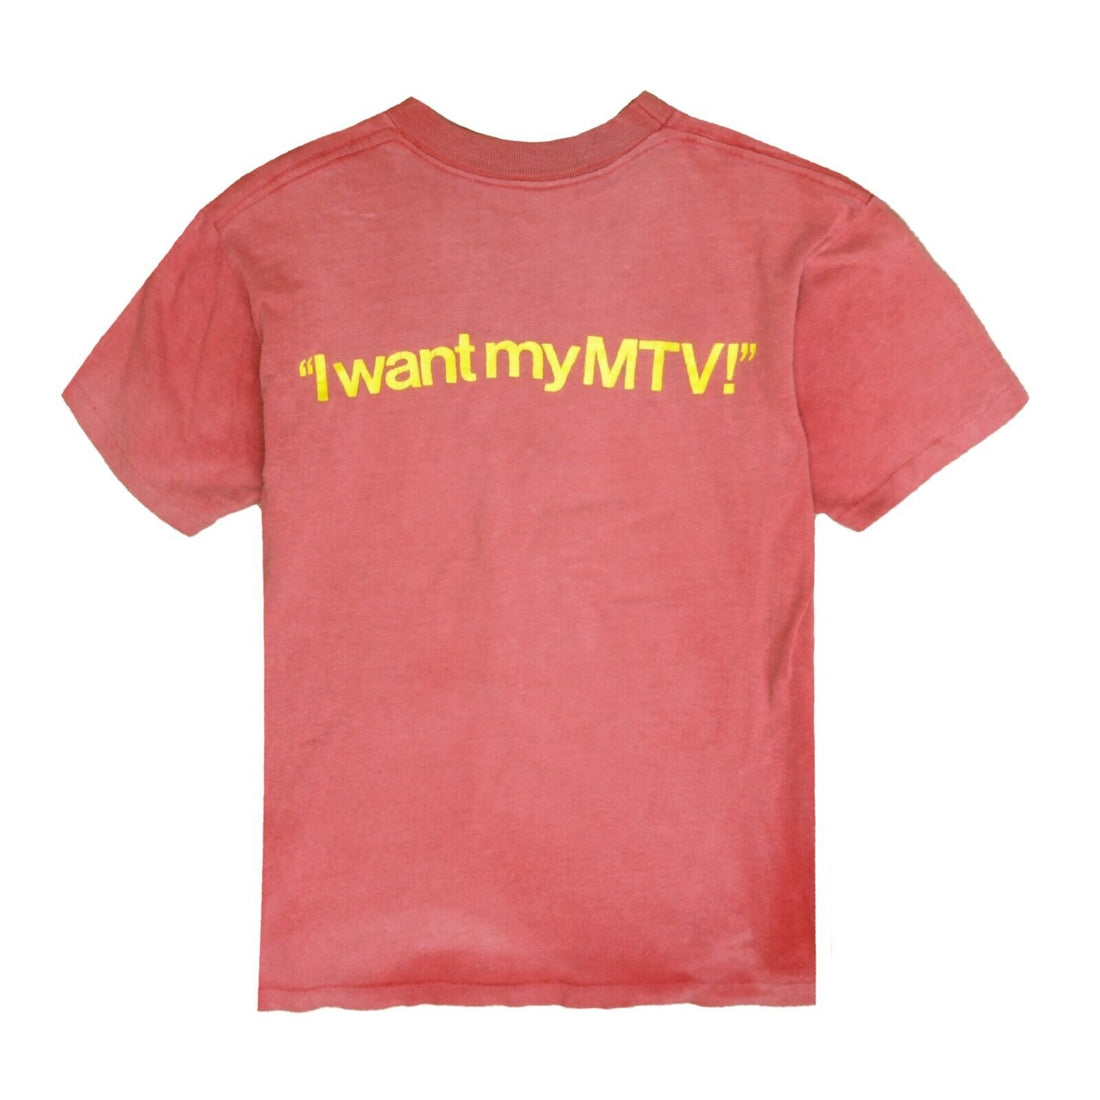 Vintage Music Television I Want My MTV T-Shirt Size Medium Red 90s